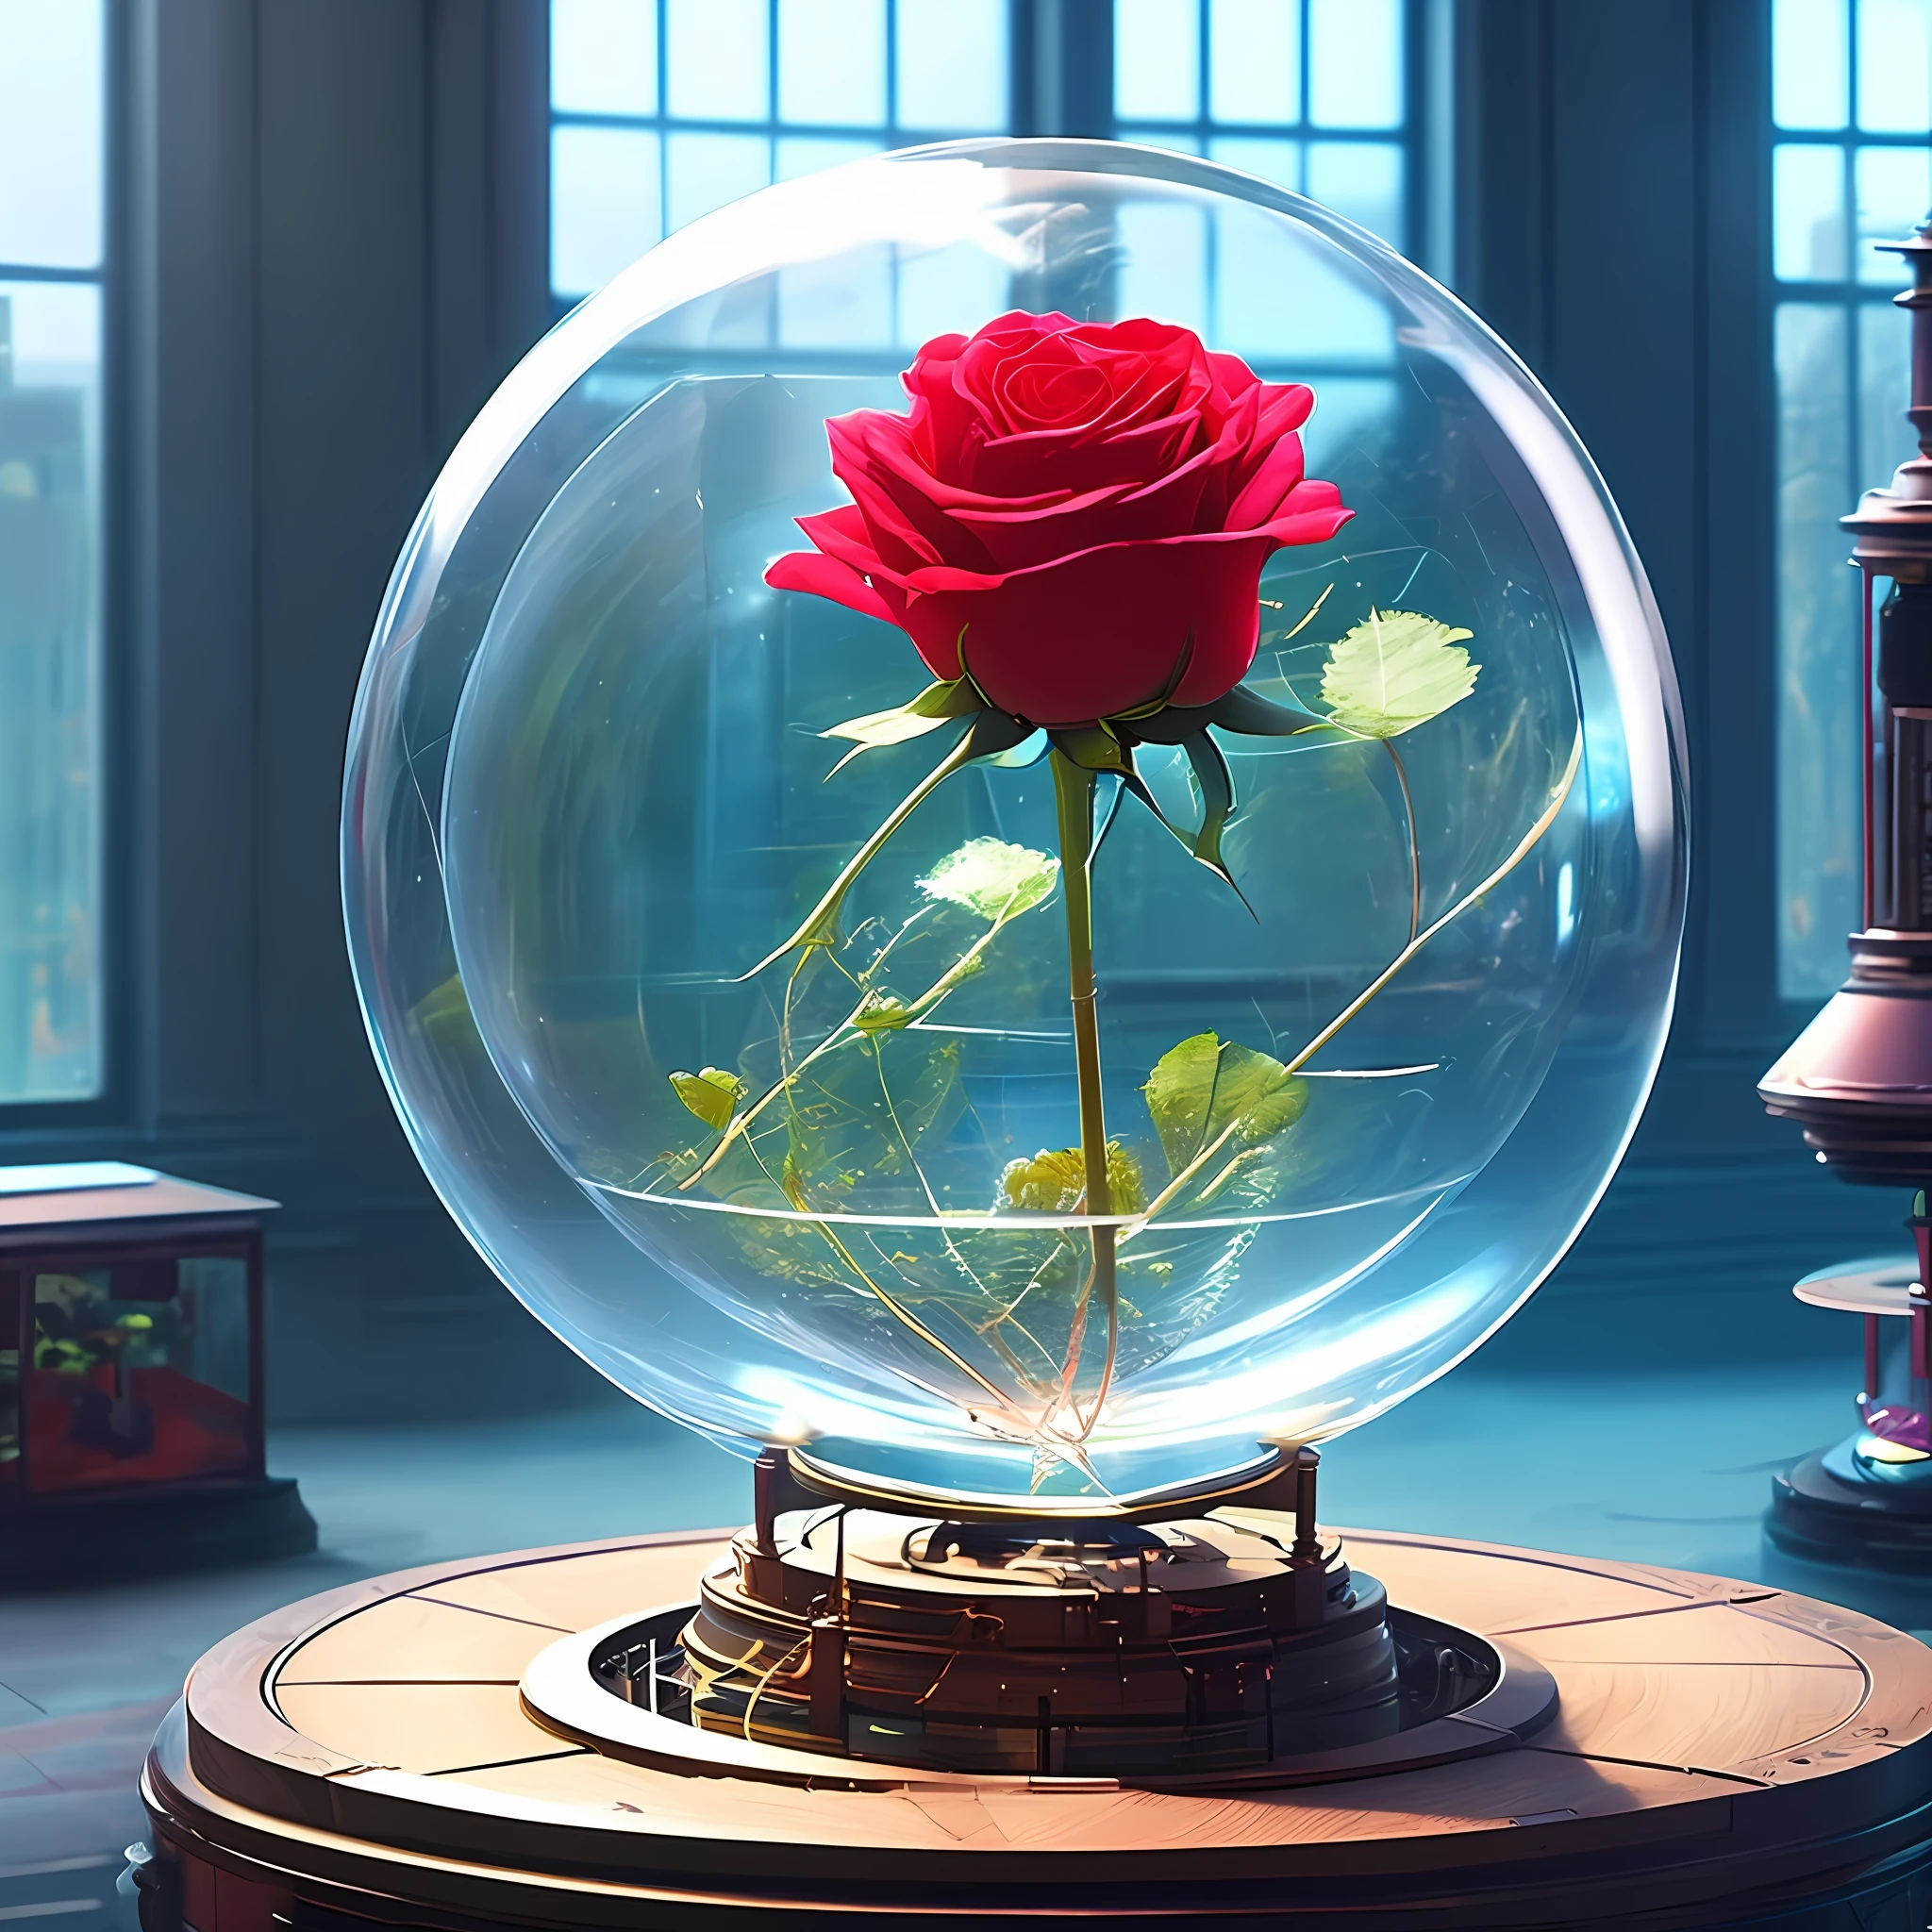 there is a rose floating in a glass dome on a music box base, melanchonic rose soft, elegant and graceful light, red rose, transparent glass vase, elegant lady, glass domes, natural point rose', beautifully lit, elegant light, graceful and elegant, rosalia, glass dome, beautiful illuminated, in a short round glass vase,  giant mechanical rose, science fiction, invention, scifi, retrofuturism